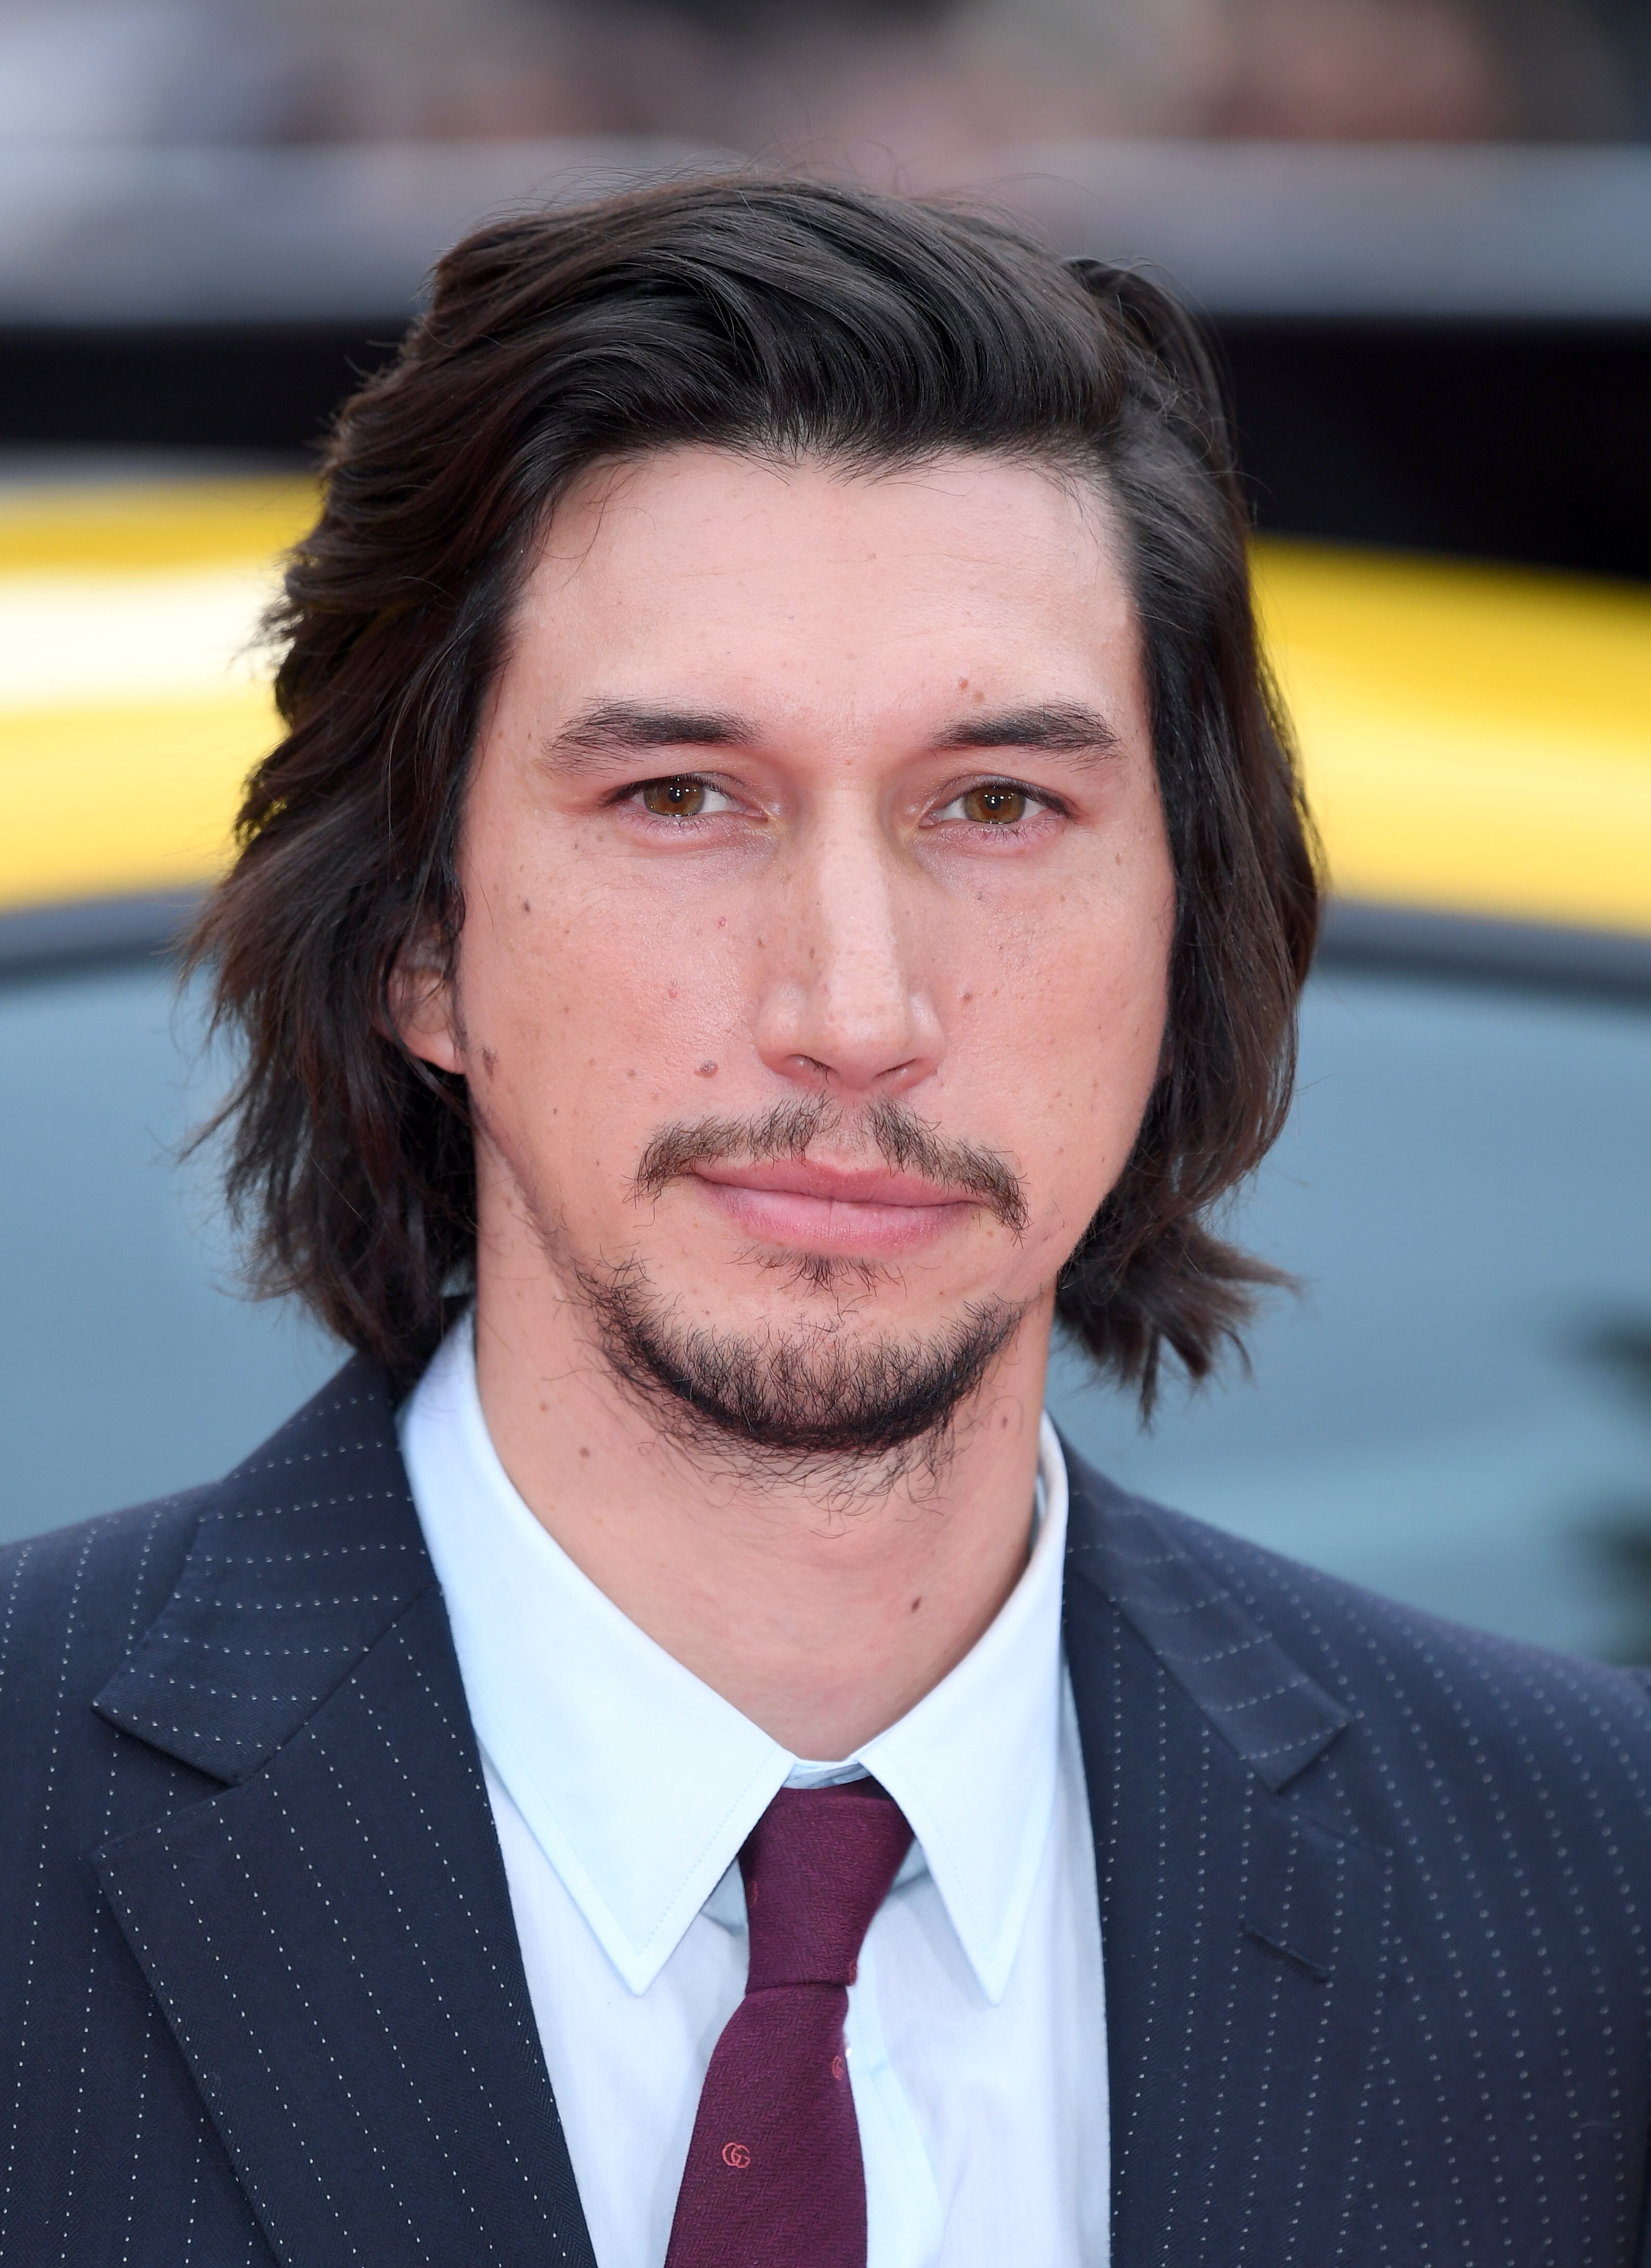 Adam Driver used to be a US Marine, and draws on his military experience as an actor. Photo: PPR/Breitling/WireImage